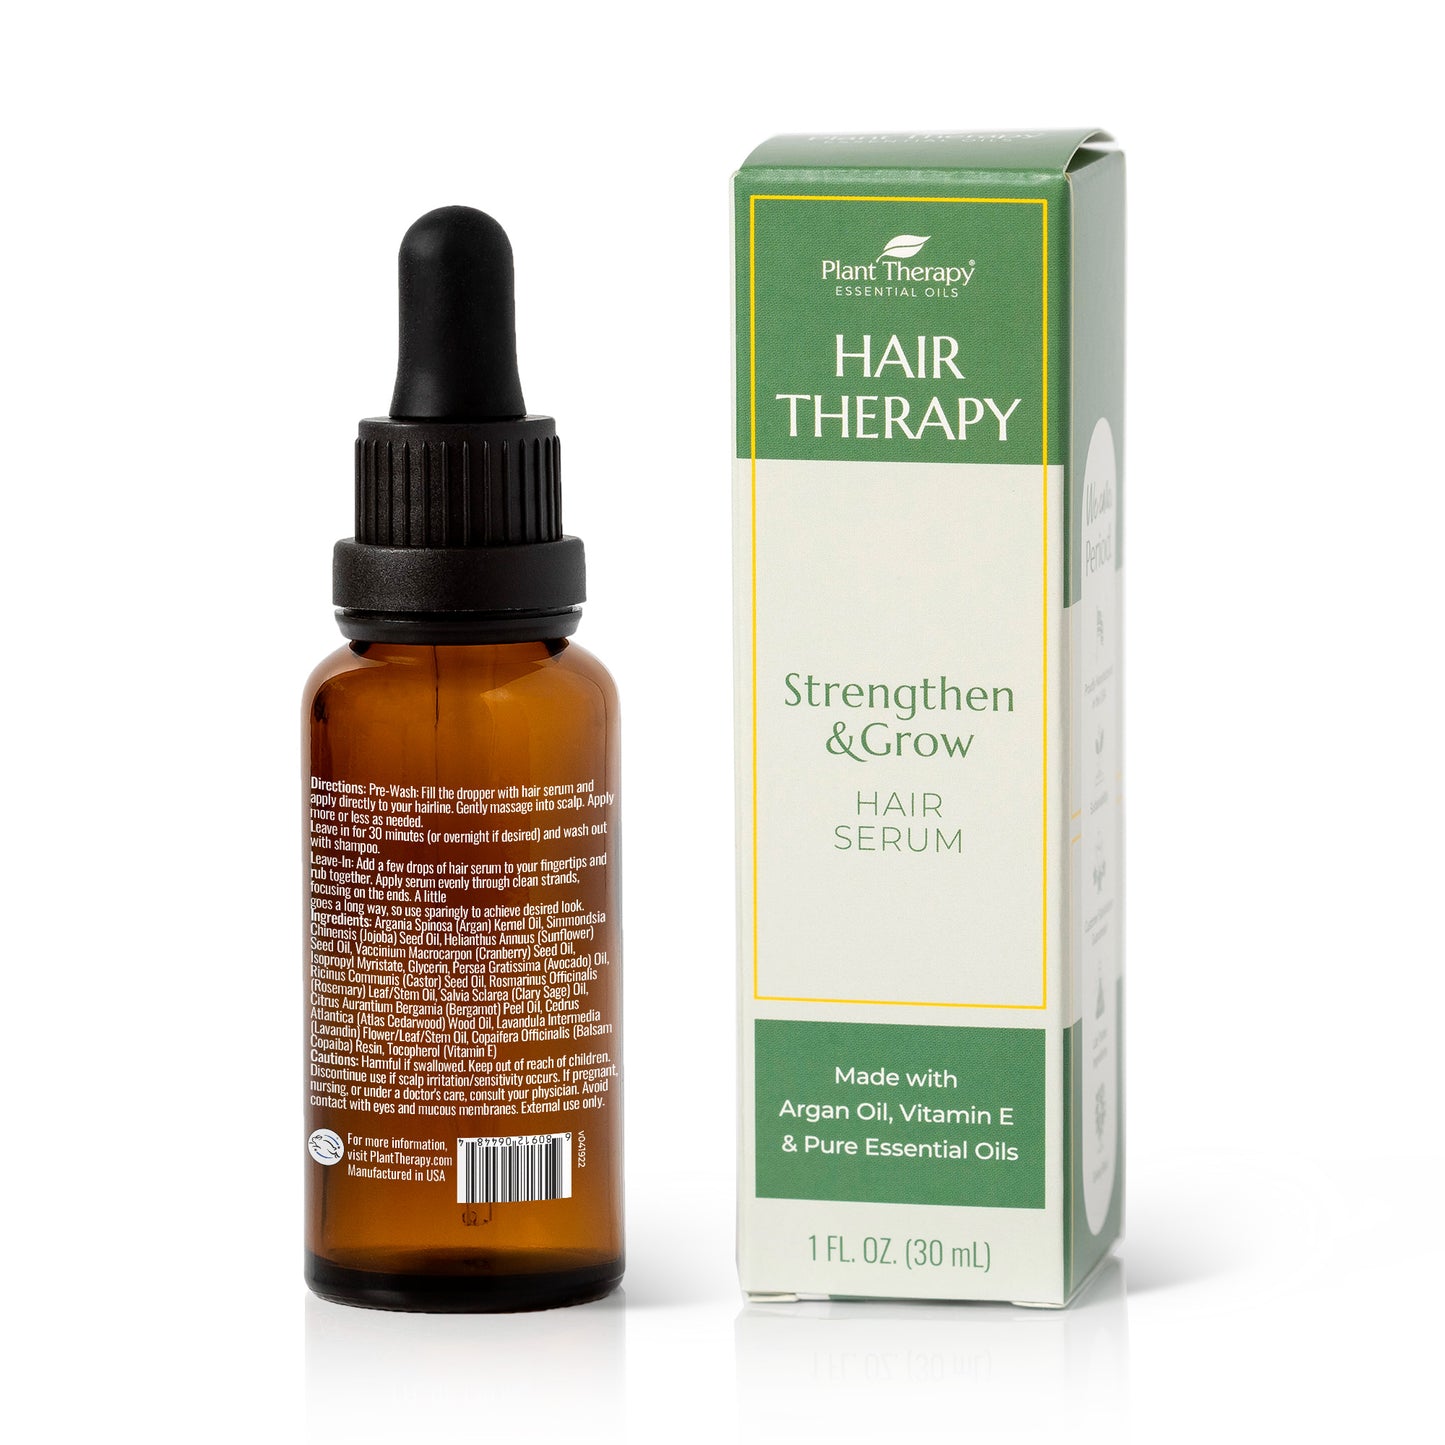 Hair therapy serum back label